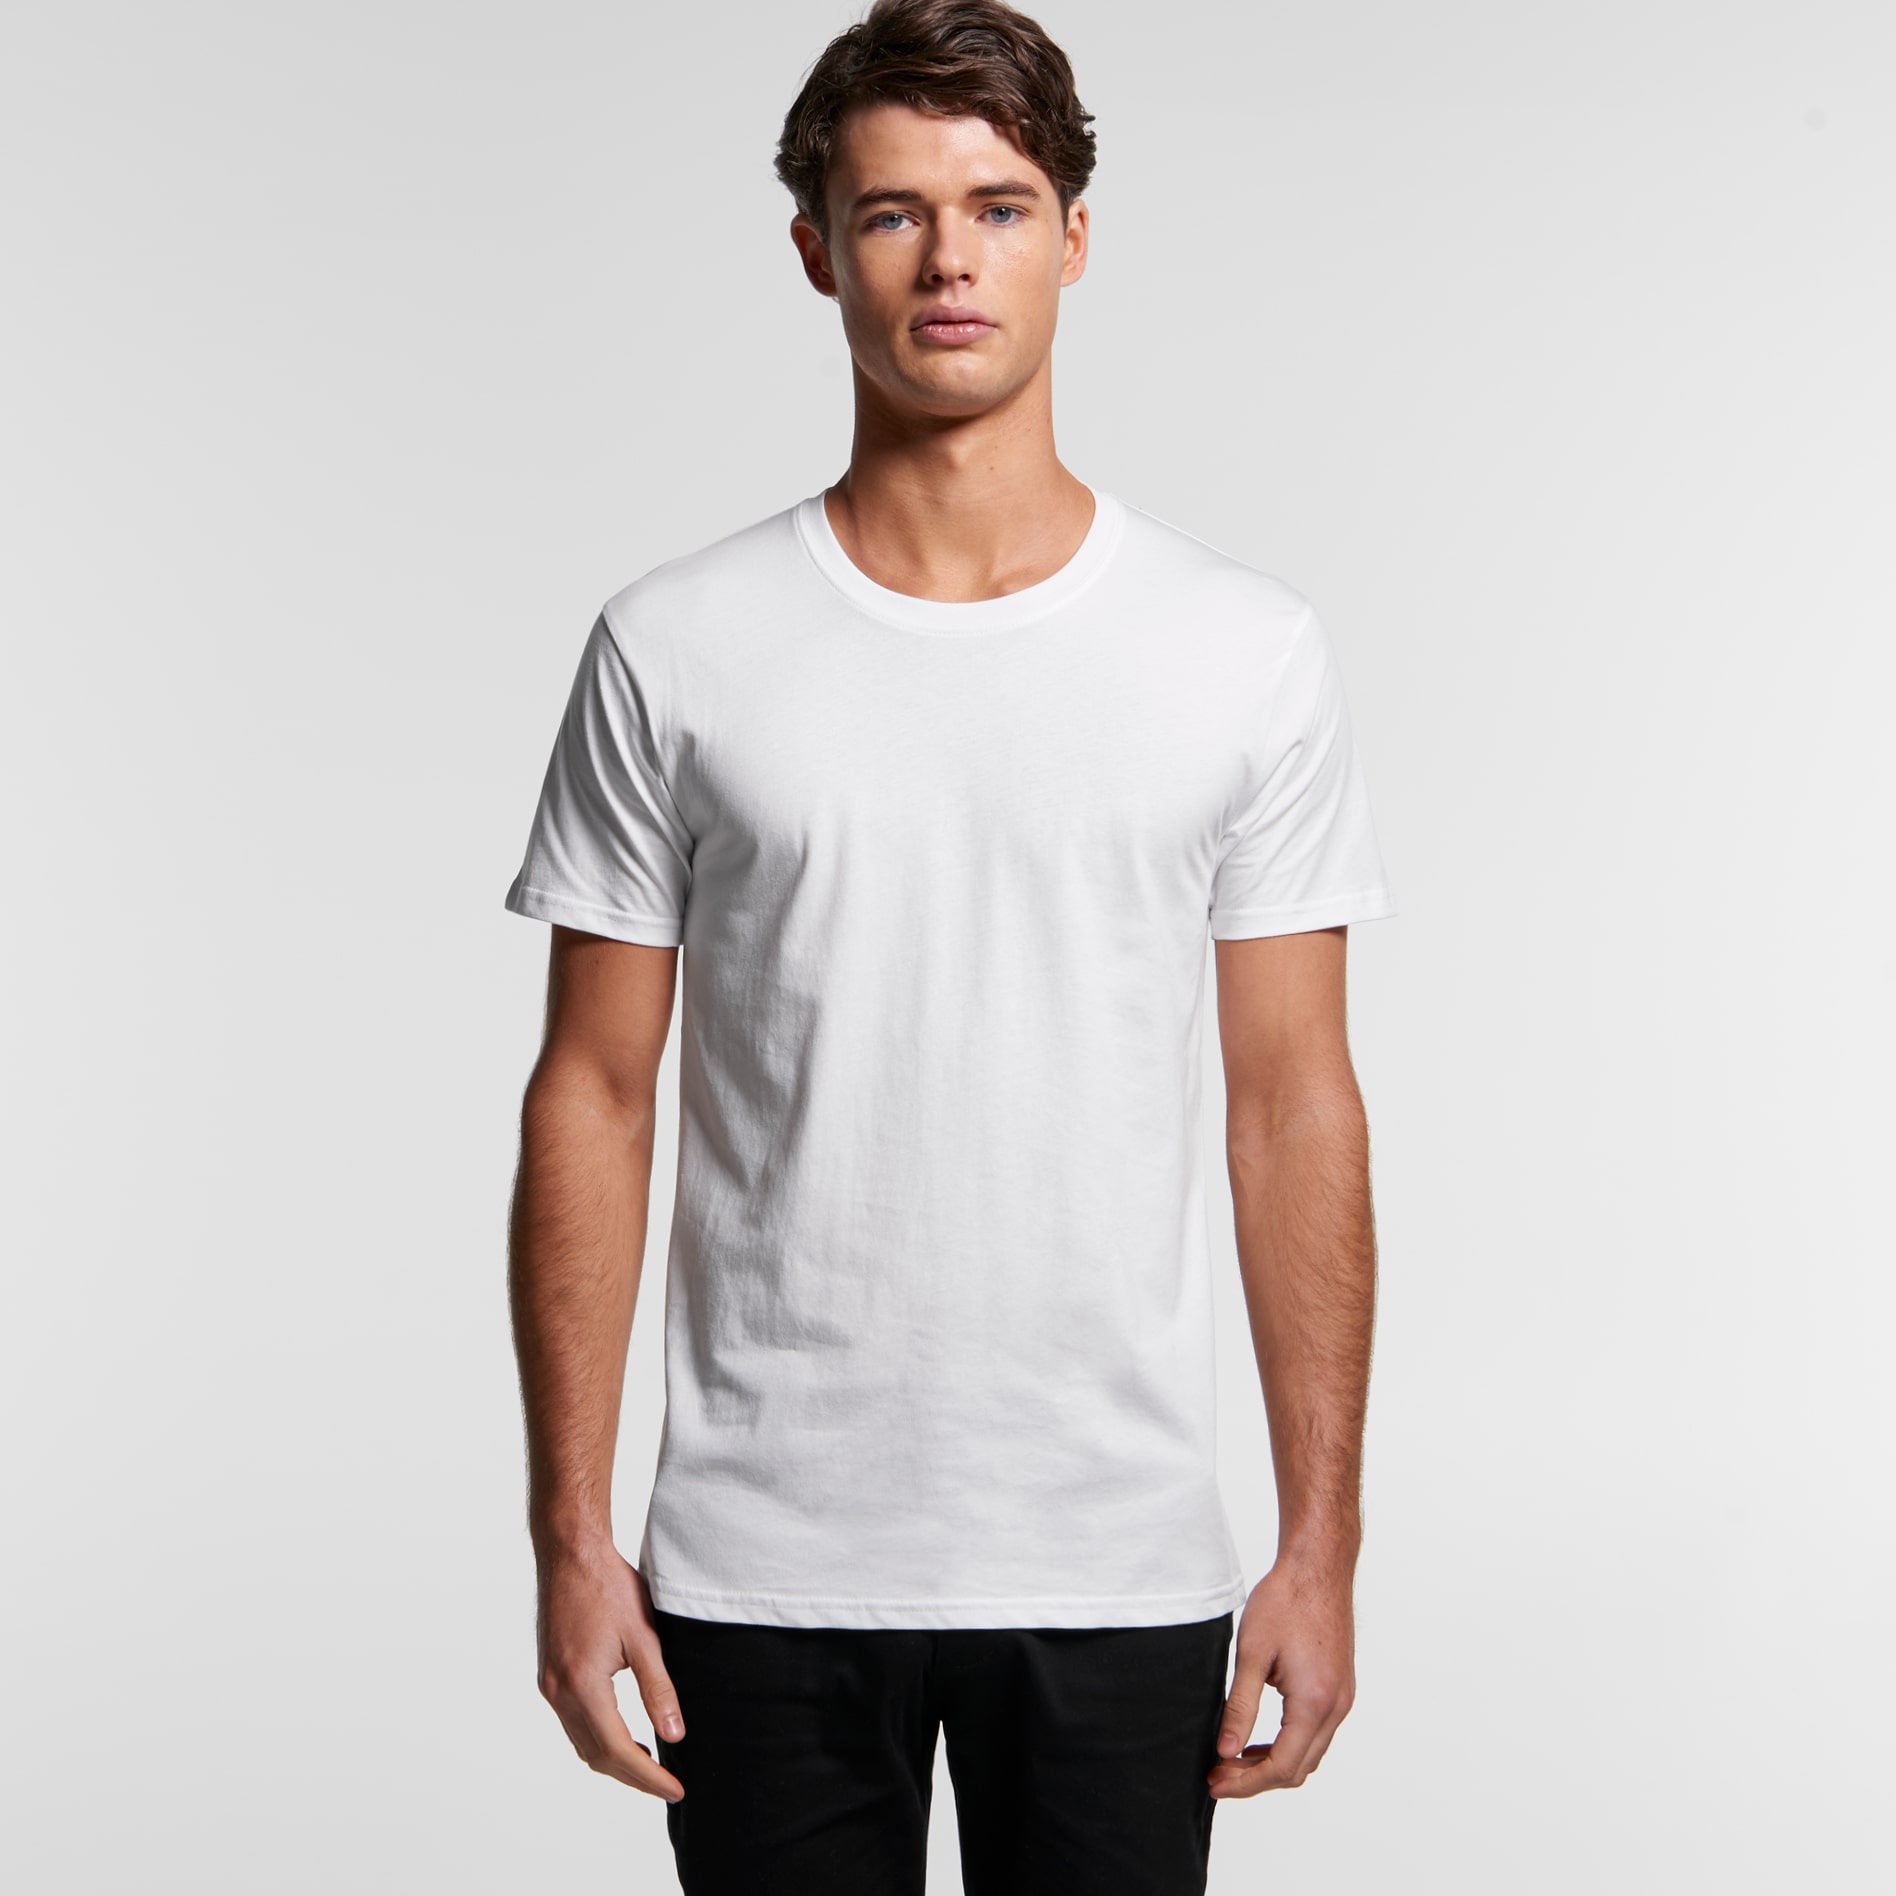 Personalised mens t shirts - 5501g staple organic tee front